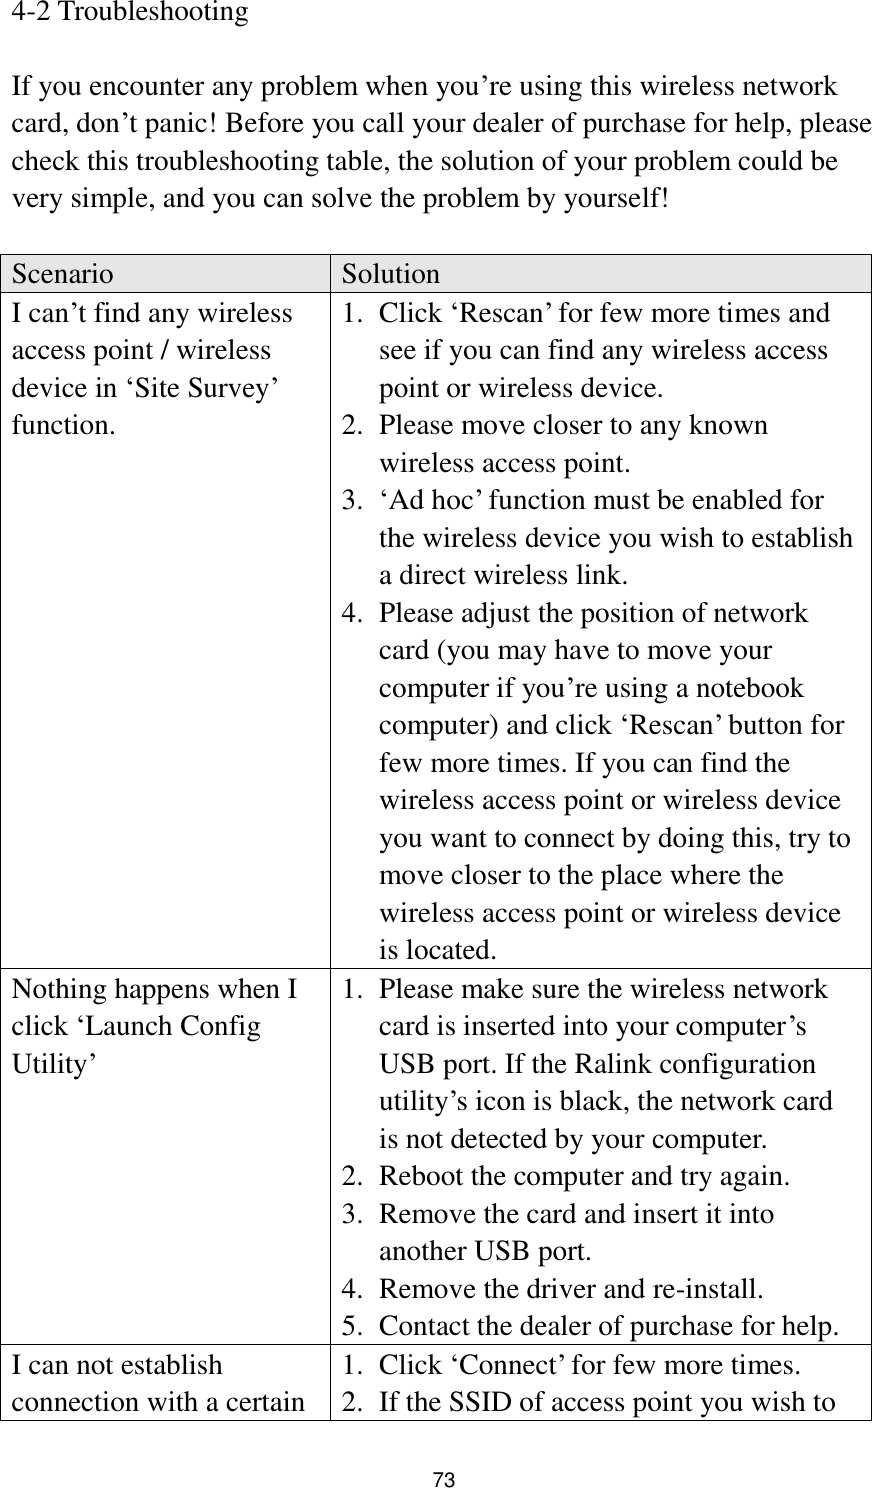  73 4-2 Troubleshooting  If you encounter any problem when you‟re using this wireless network card, don‟t panic! Before you call your dealer of purchase for help, please check this troubleshooting table, the solution of your problem could be very simple, and you can solve the problem by yourself!  Scenario Solution I can‟t find any wireless access point / wireless device in „Site Survey‟ function. 1. Click „Rescan‟ for few more times and see if you can find any wireless access point or wireless device. 2. Please move closer to any known wireless access point. 3. „Ad hoc‟ function must be enabled for the wireless device you wish to establish a direct wireless link. 4. Please adjust the position of network card (you may have to move your computer if you‟re using a notebook computer) and click „Rescan‟ button for few more times. If you can find the wireless access point or wireless device you want to connect by doing this, try to move closer to the place where the wireless access point or wireless device is located. Nothing happens when I click „Launch Config Utility‟ 1. Please make sure the wireless network card is inserted into your computer‟s USB port. If the Ralink configuration utility‟s icon is black, the network card is not detected by your computer. 2. Reboot the computer and try again. 3. Remove the card and insert it into another USB port. 4. Remove the driver and re-install. 5. Contact the dealer of purchase for help. I can not establish connection with a certain 1. Click „Connect‟ for few more times. 2. If the SSID of access point you wish to 